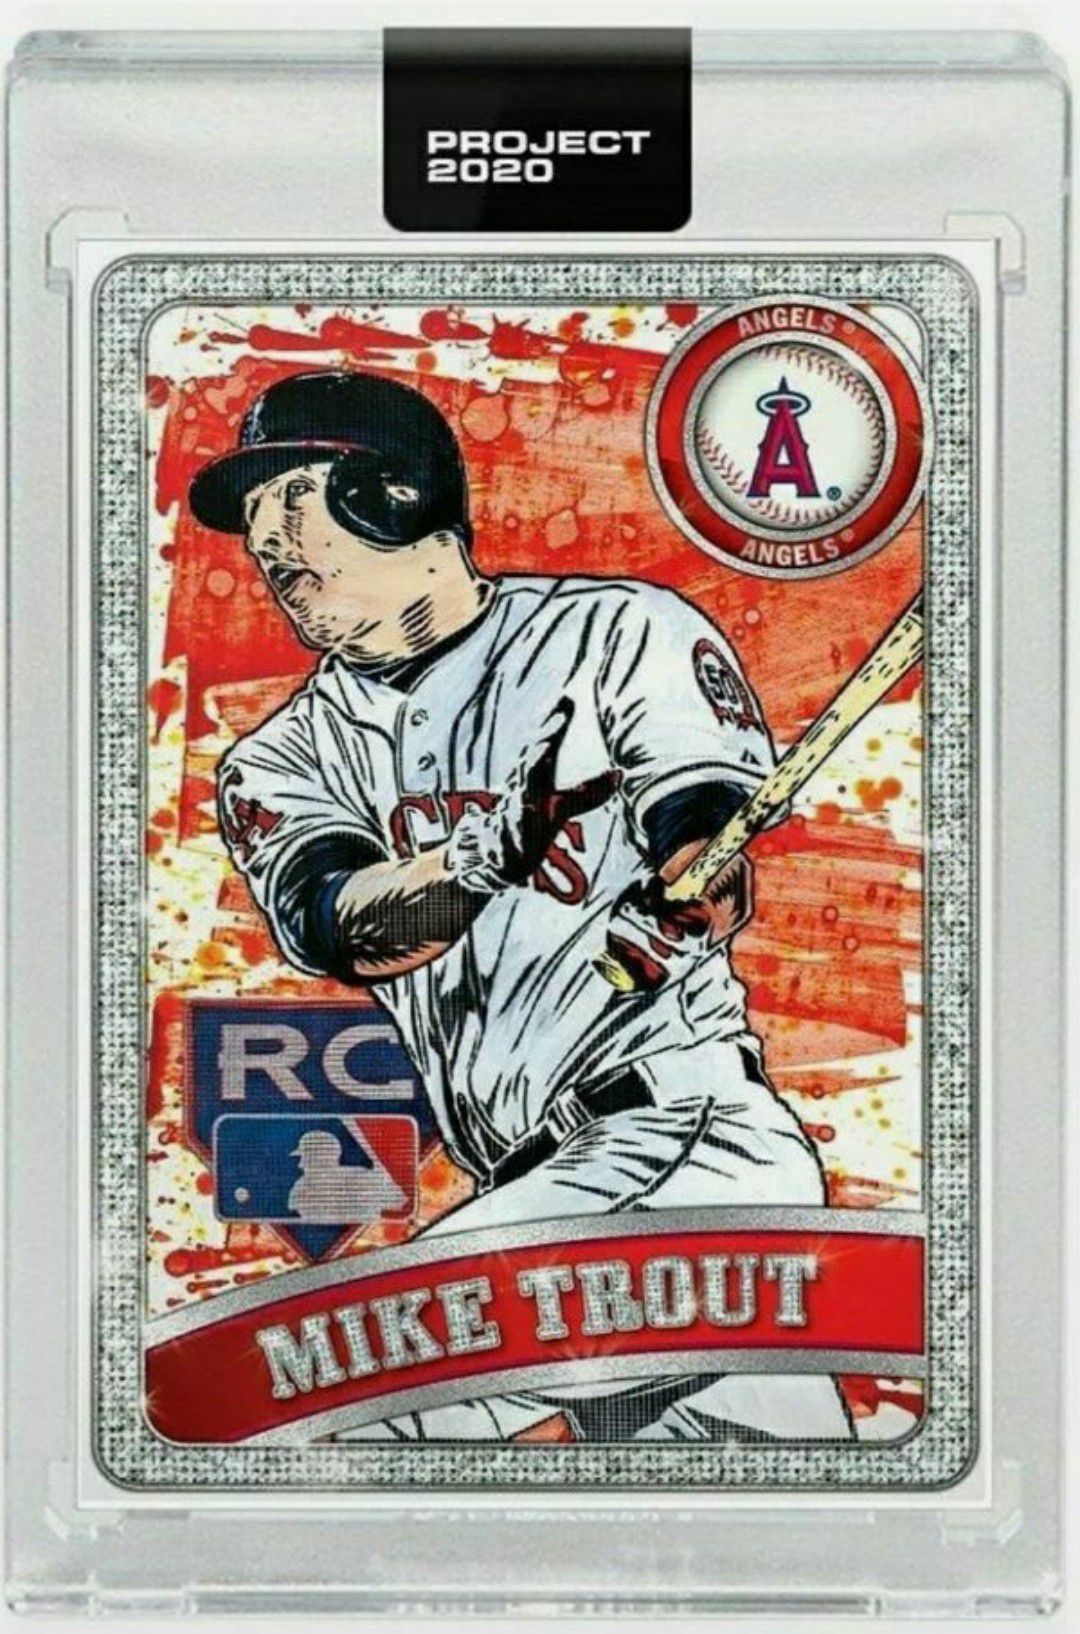 Mike Trout Topps Project 2020 -- thick 130pt baseball card featuring Ben Baller border Anaheim los angeles angels